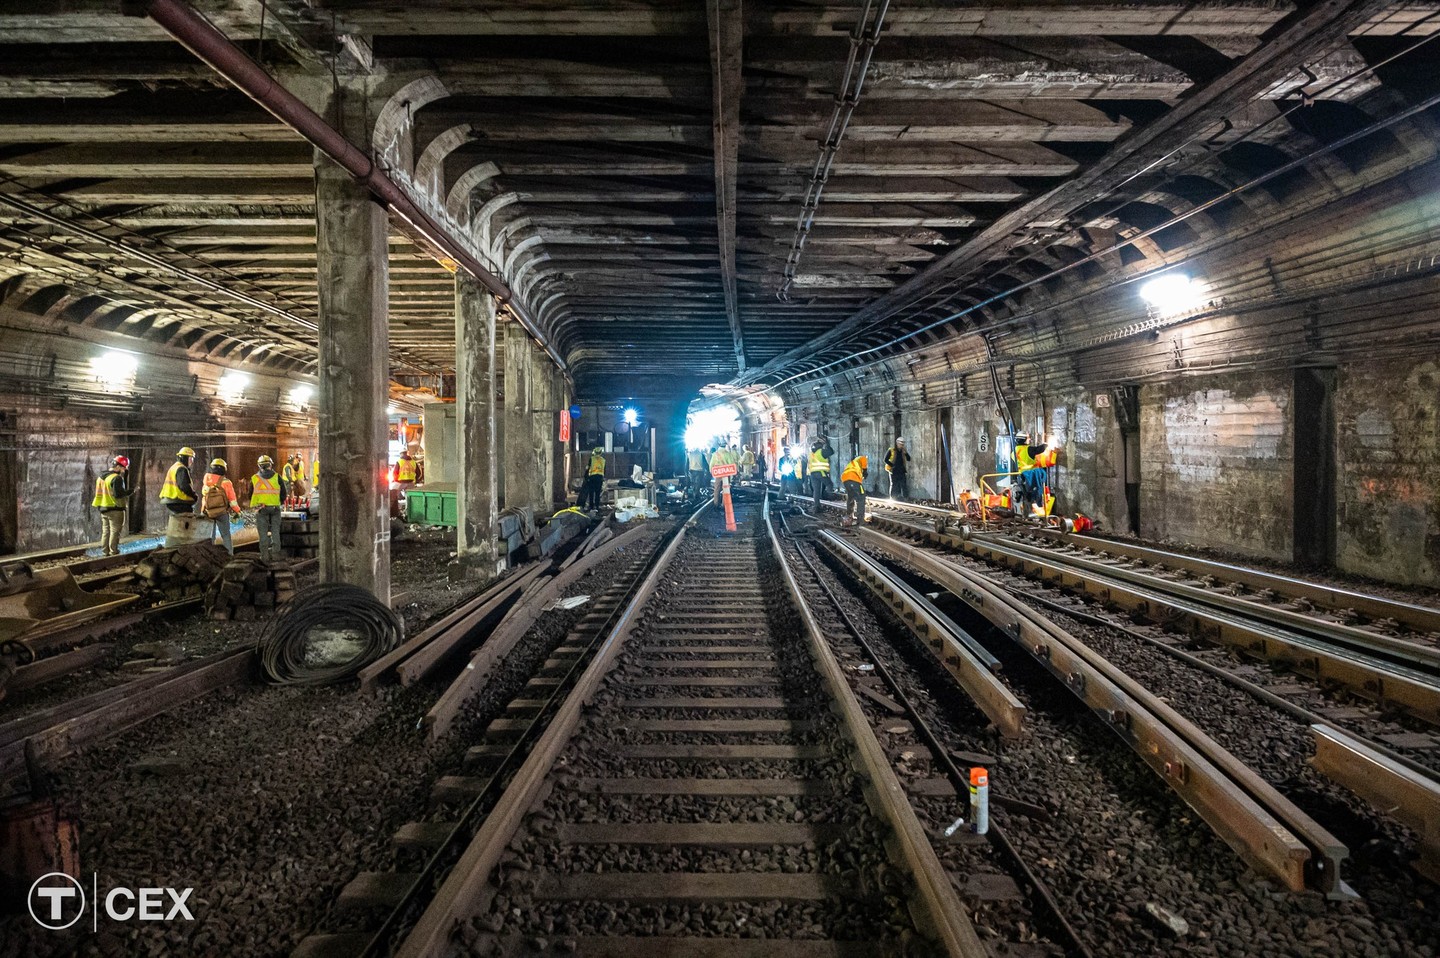 Workers in neon yellow vests work among rail tracks in a wide tunnel under bright electric lights.